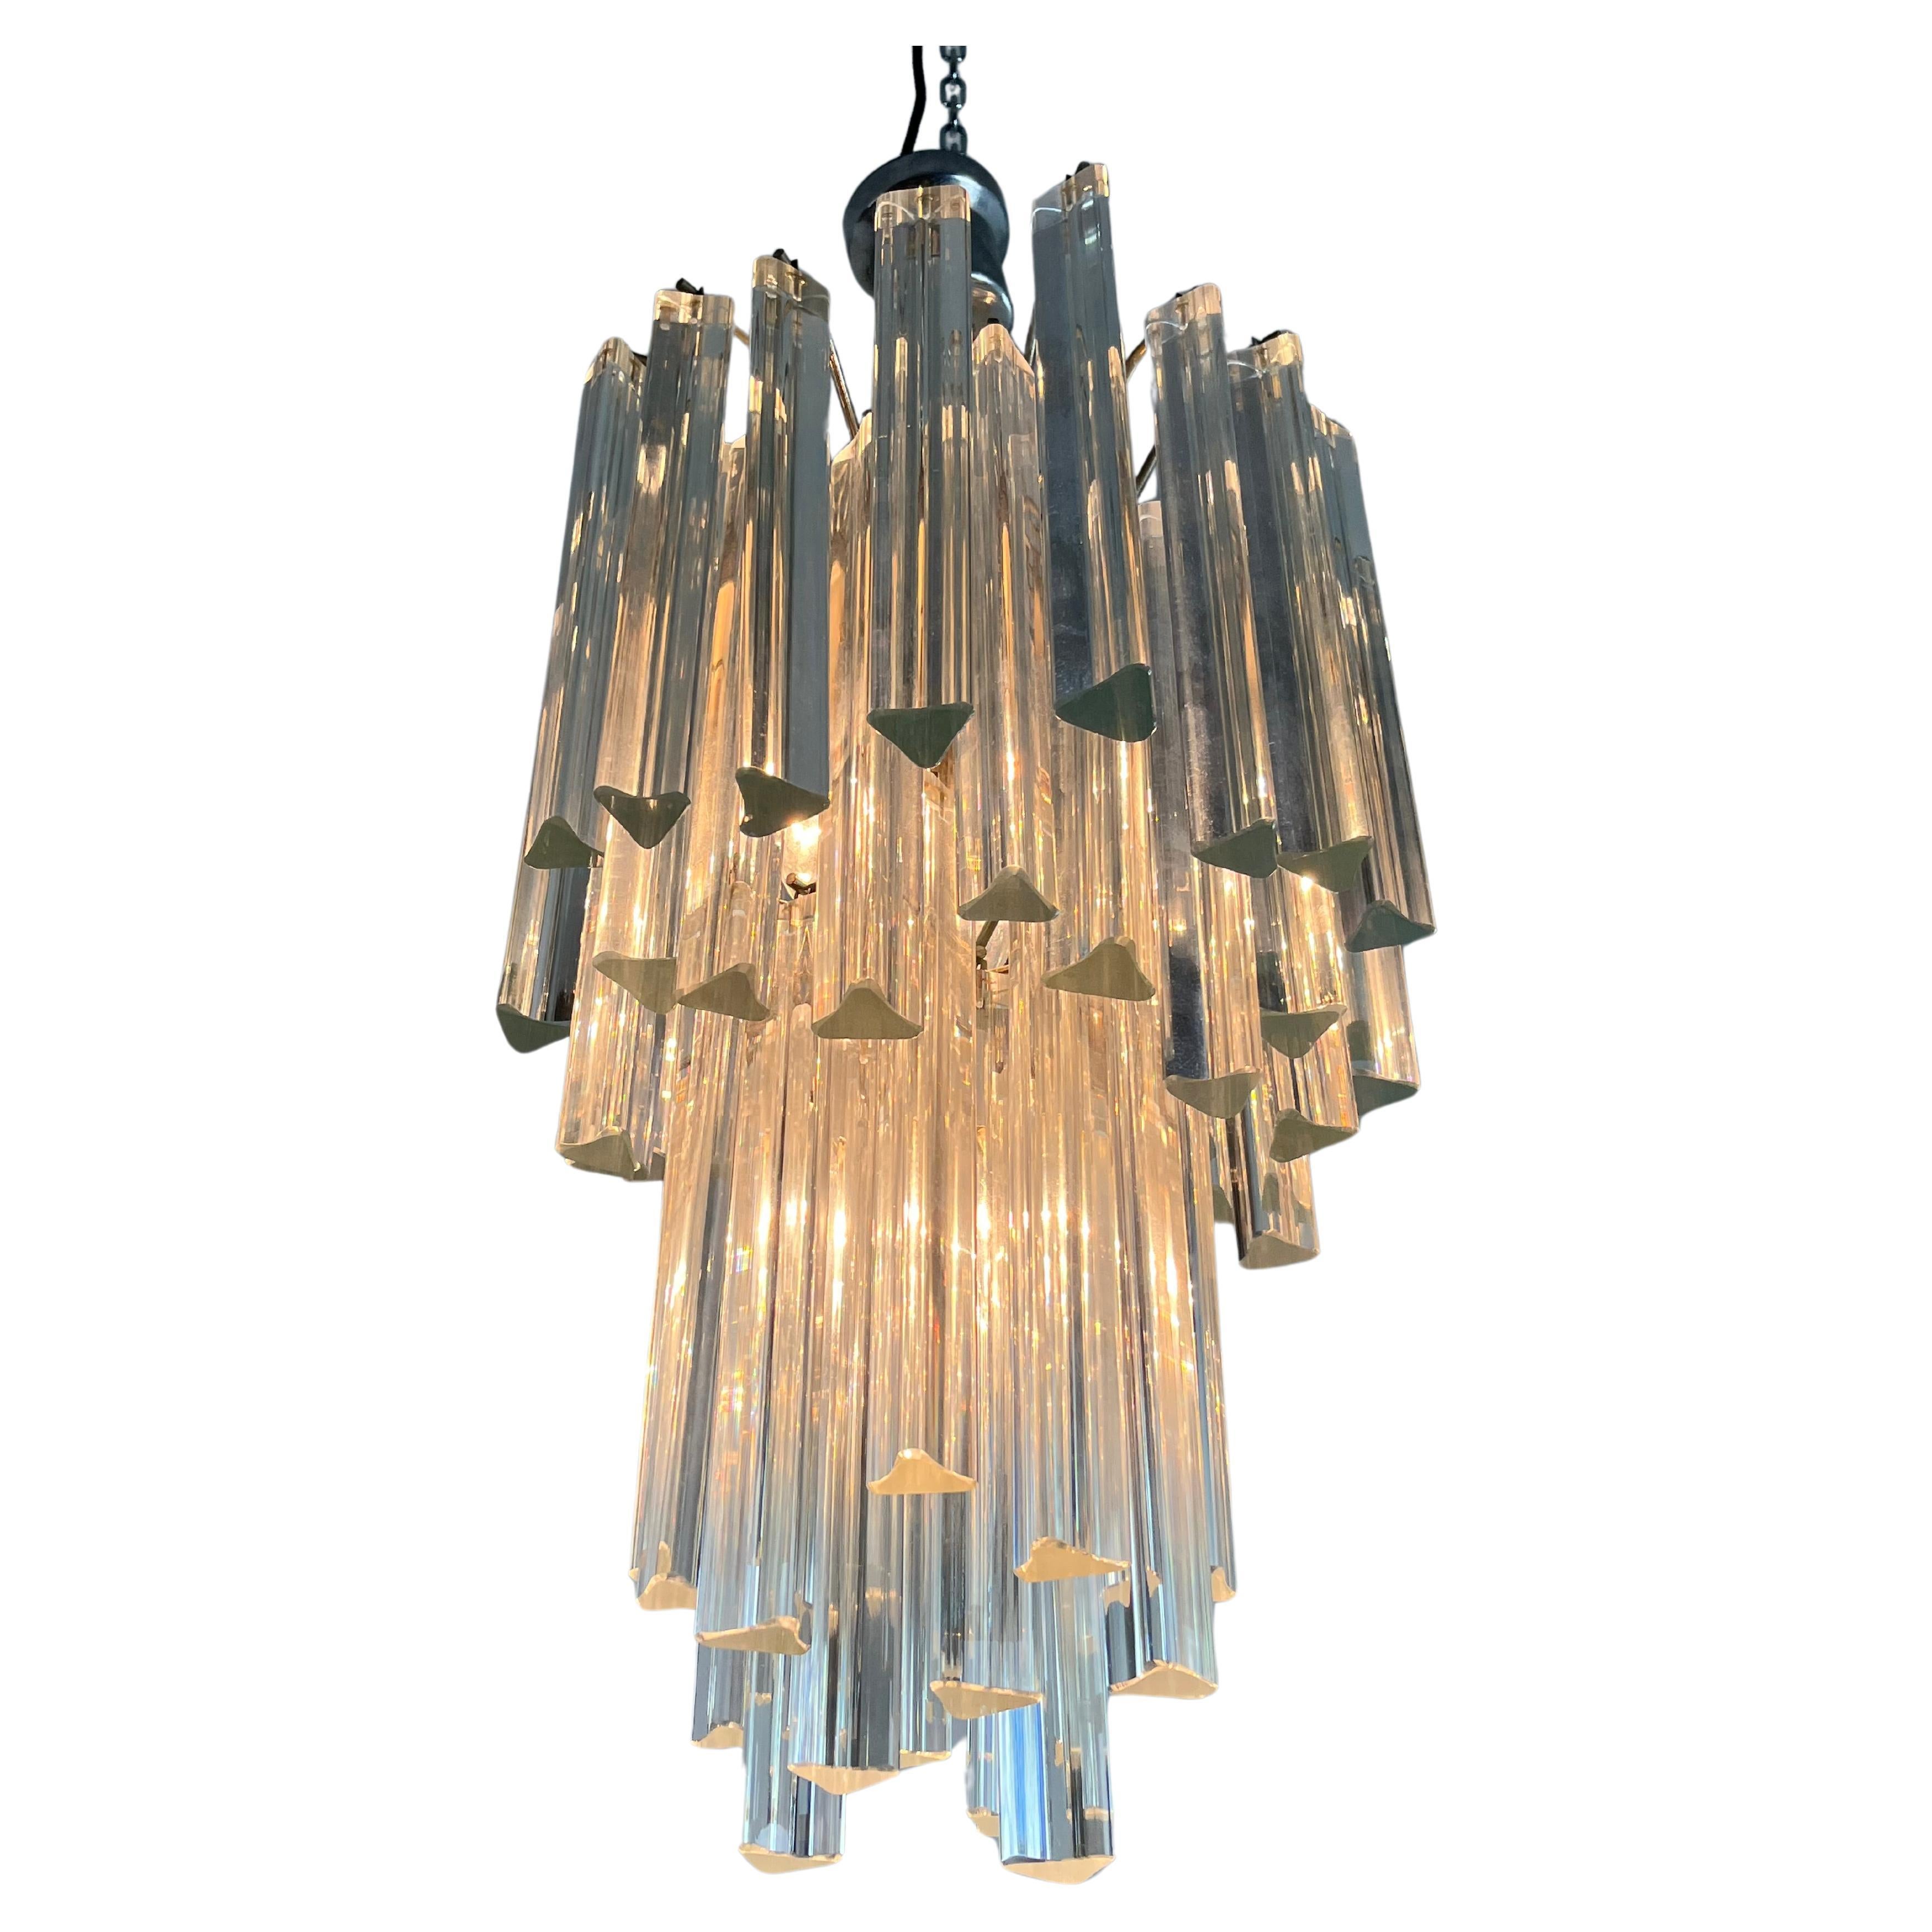 4-light Venini chandelier, Trilobi model, Mid-century Murano glass, 1960s
Purchased in Venice by my grandparents.
Metal structure. 54 glasses.
Intact and working, E14 lamps.
Small and imperceptible signs of aging.

We guarantee adequate packaging